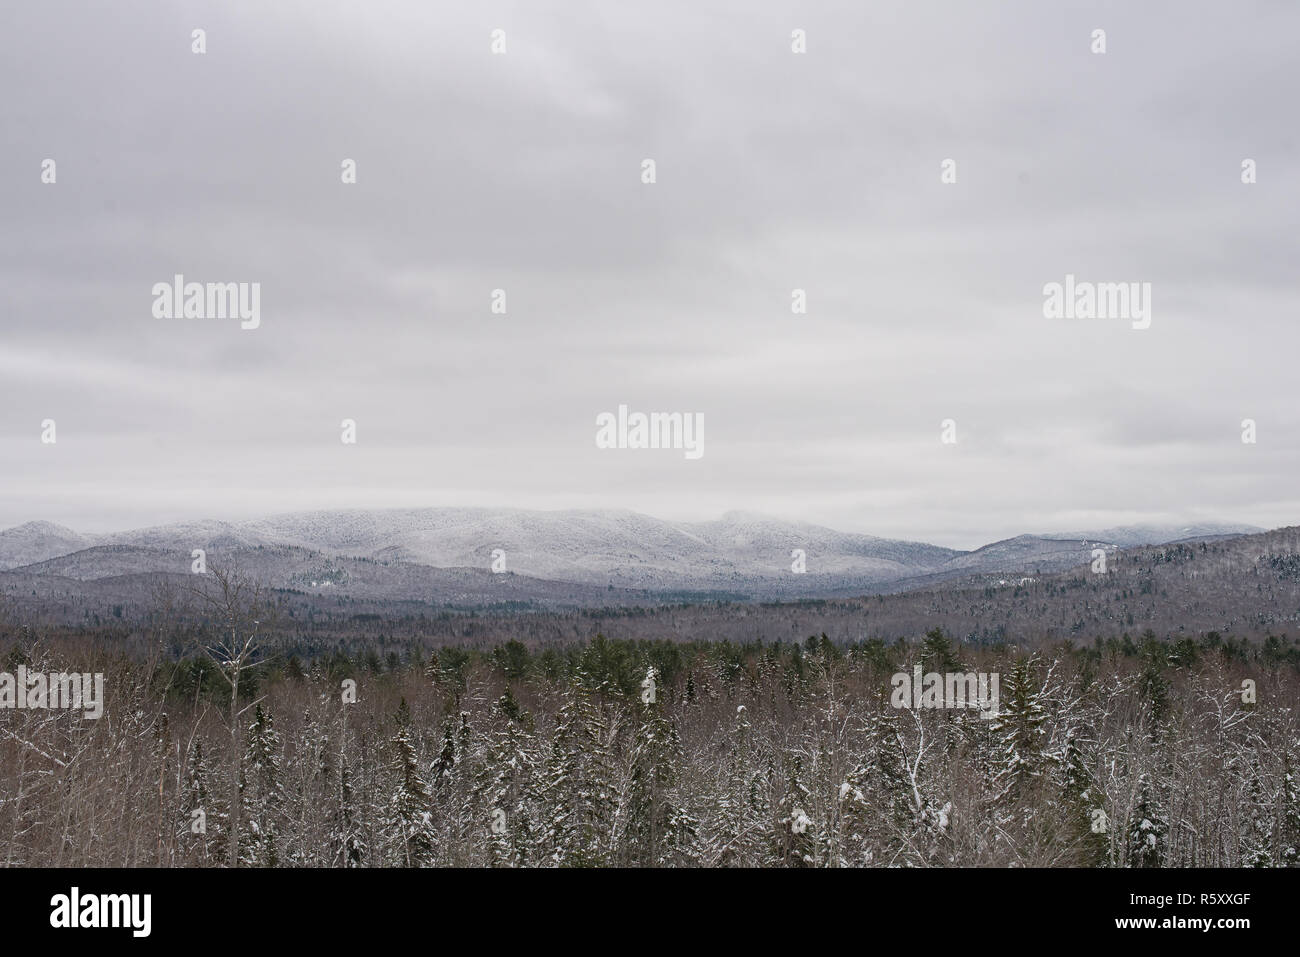 A winter landscape or snowscape of the Adirondack Mountains near Indian Lake, NY USA in the Adirondack Park. Stock Photo